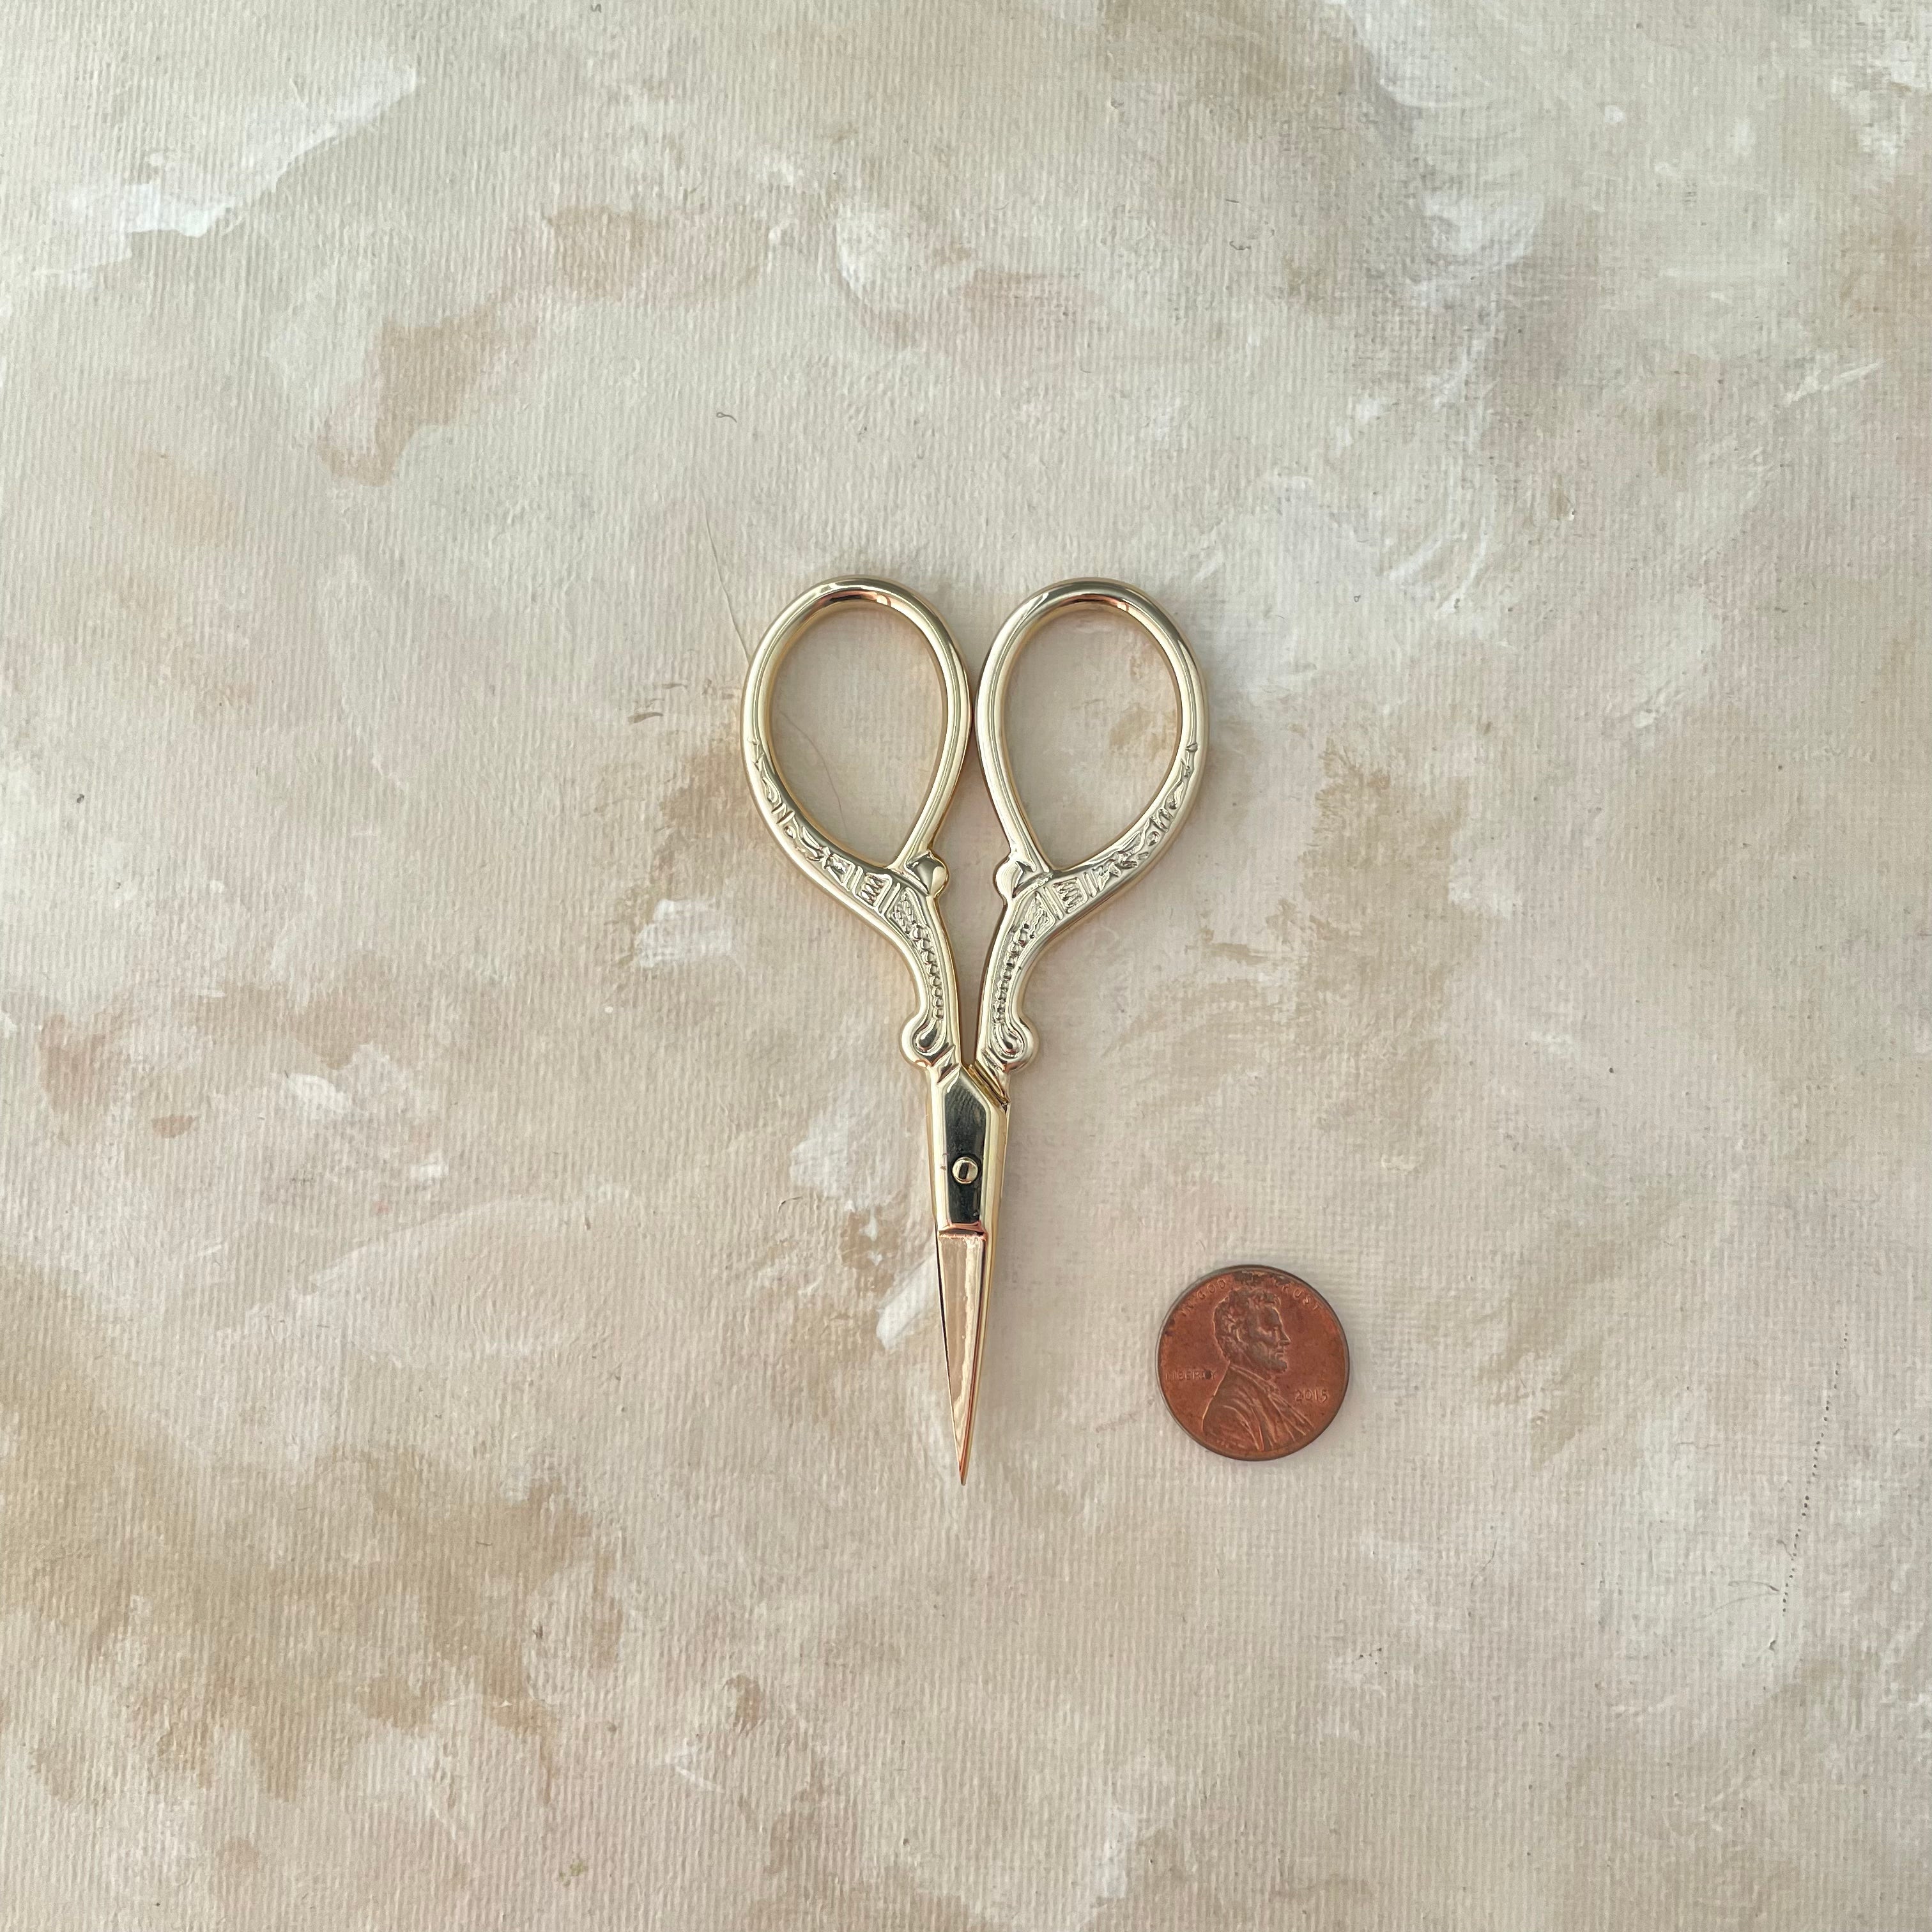 light GOLD Scissors: 3 ½” long x 1 ¾”at widest point  -  Wedding Flat lay props from Champagne & GRIT